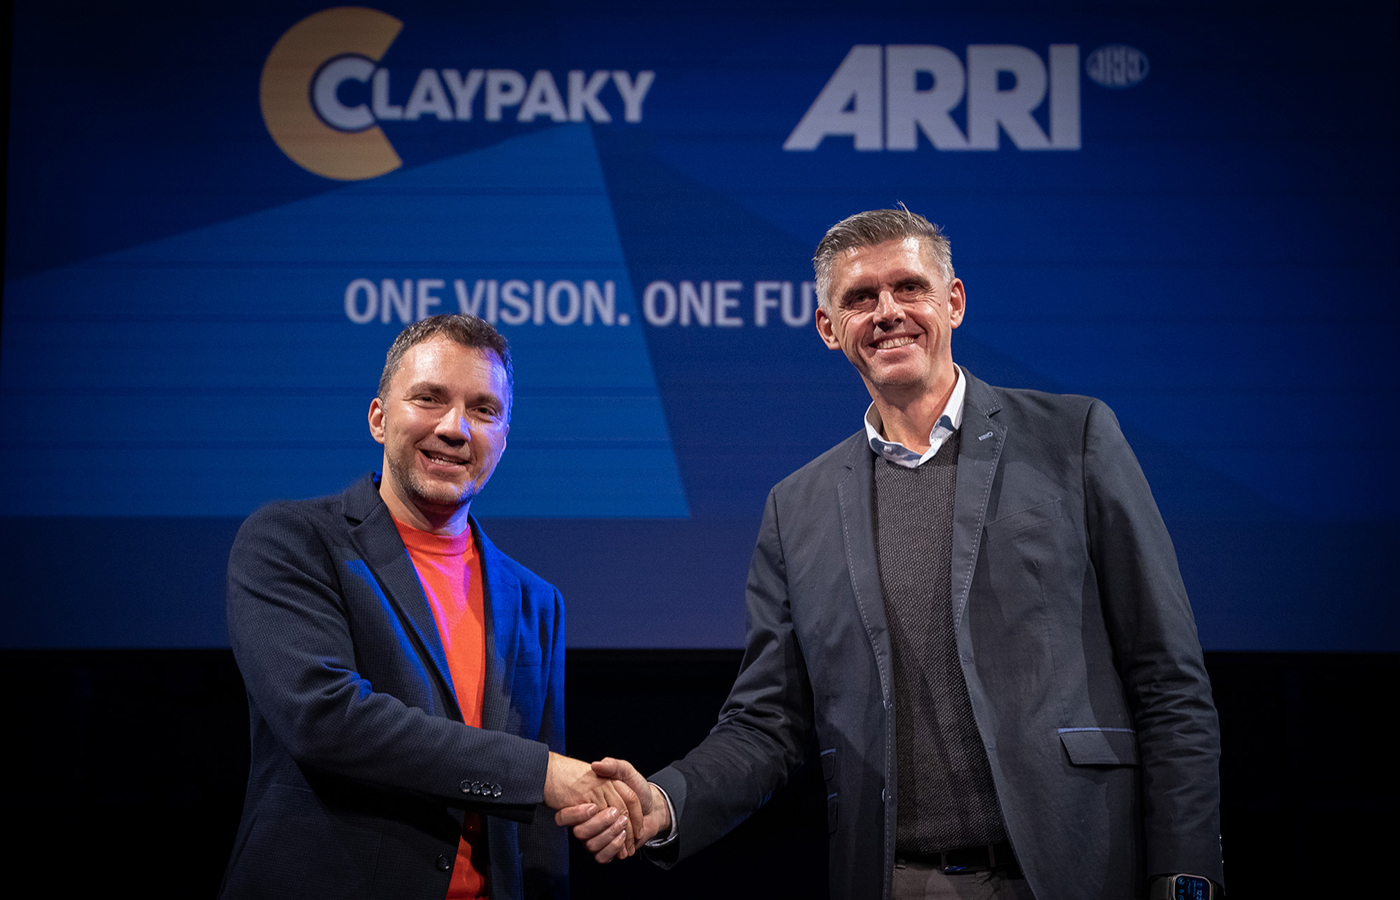 Dr. Matthias Erb (opening image, r.), Chairman of the Executive Board at ARRI, and Claypaky CEO Marcus Graser welcome the new cooperation.